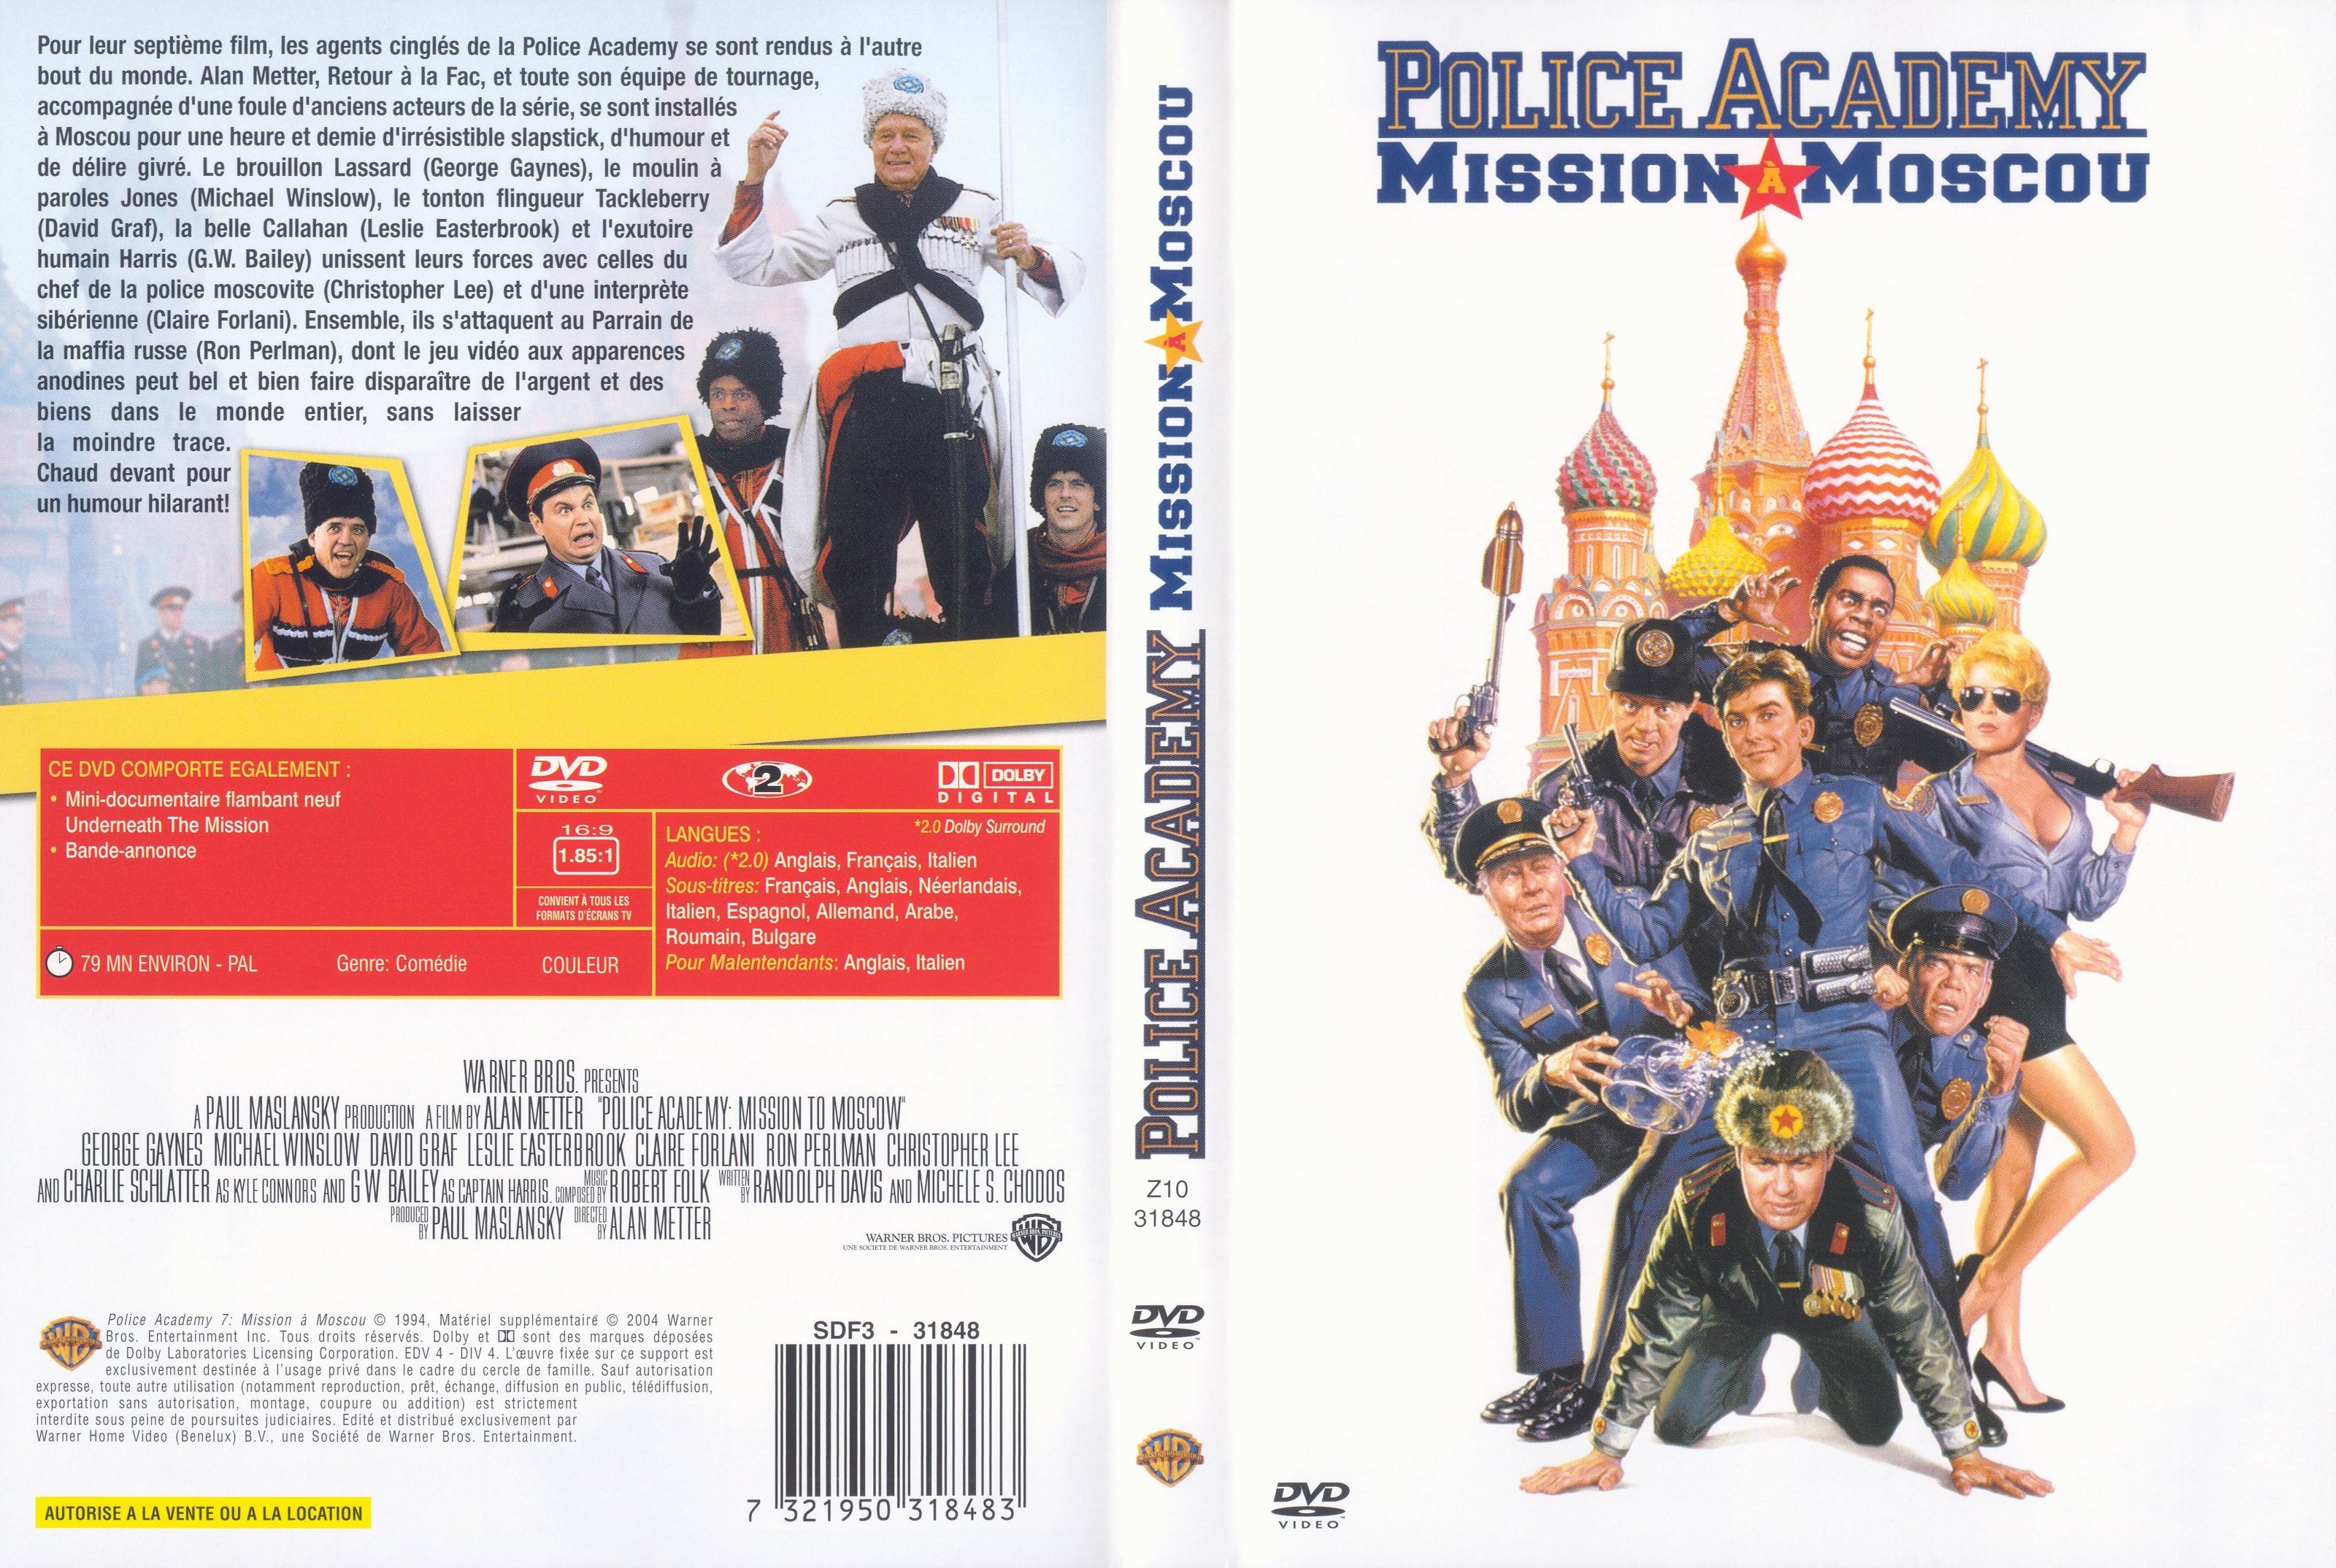 Jaquette DVD Police academy 7